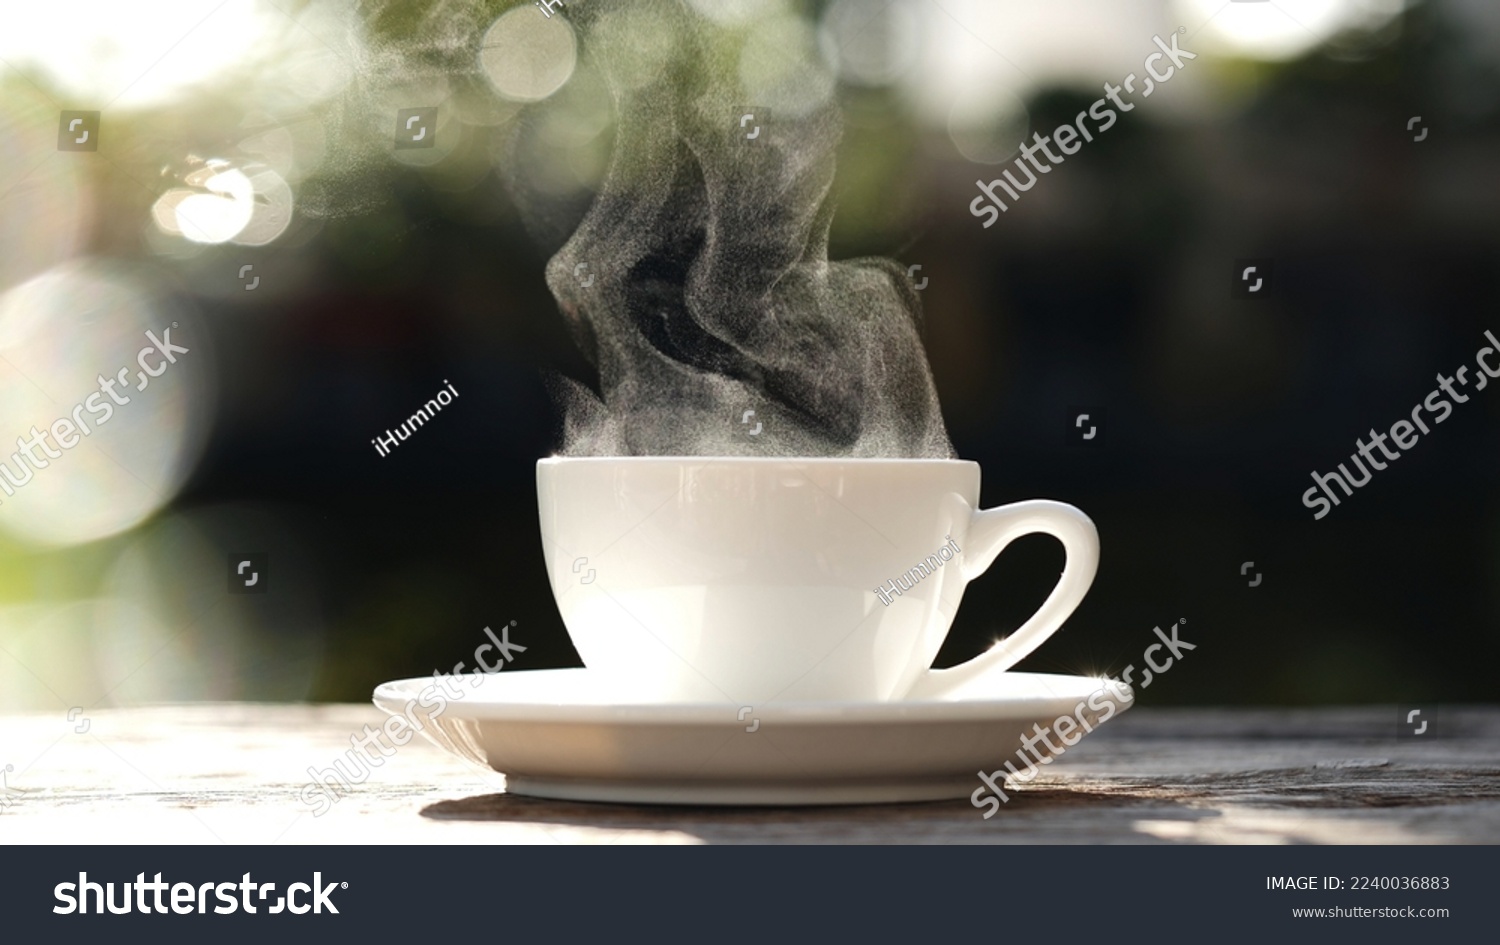 Close-up white coffee cup, mug with steaming smoke of coffee on old wooden table in morning nature outdoor, garden background, 4K. Hot Coffee Drink, Beverage Concept. #2240036883